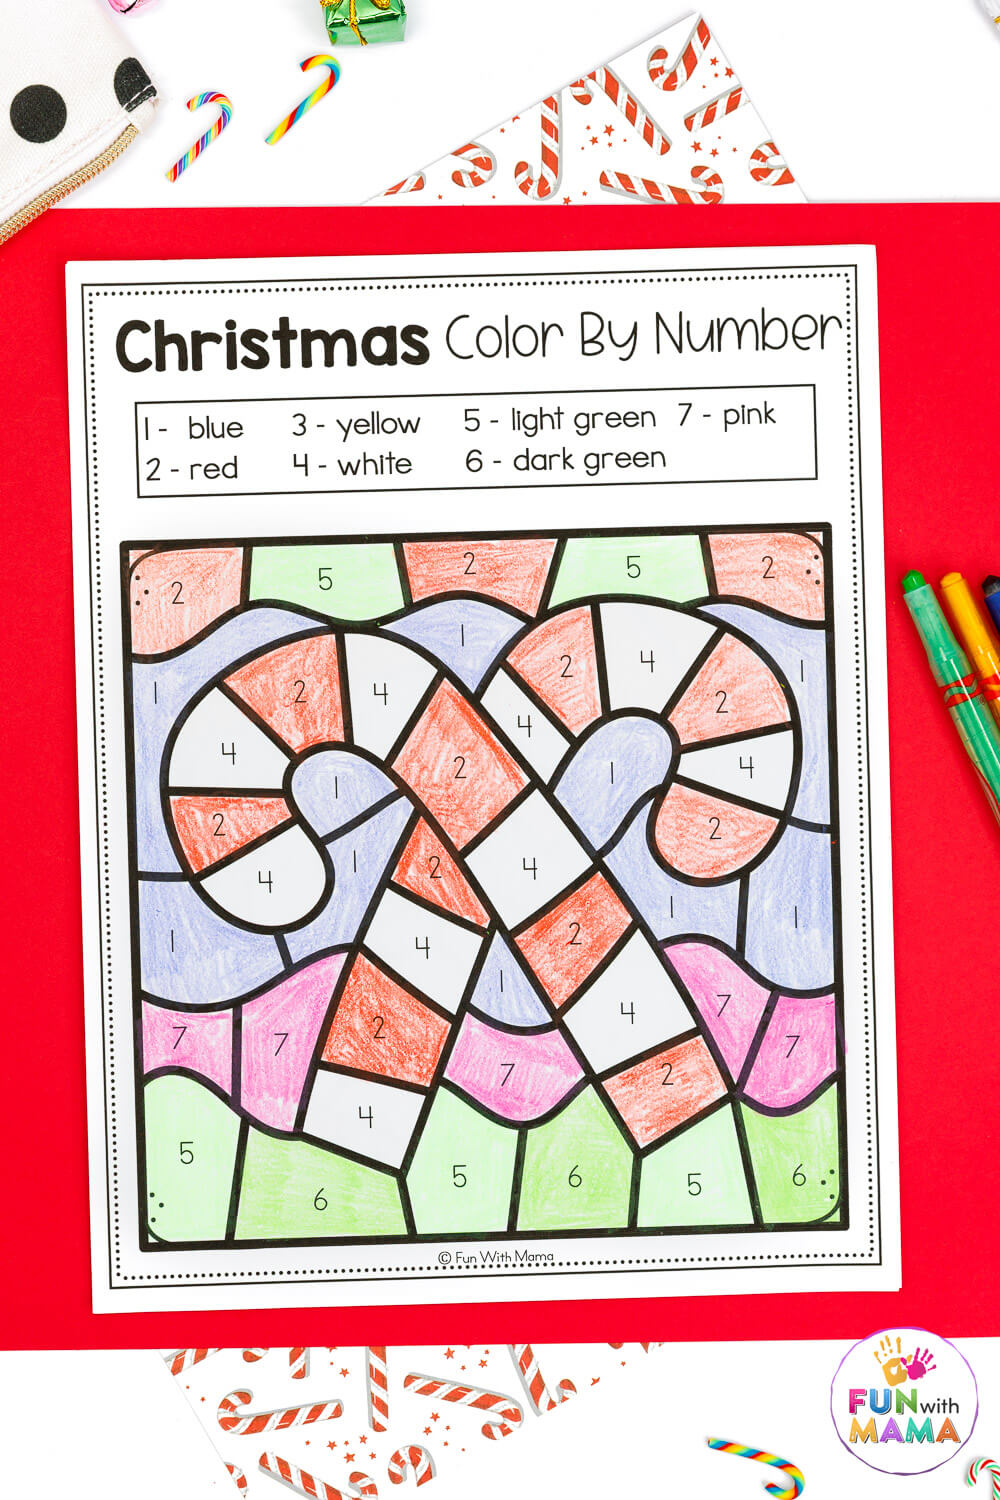 Christmas color by number coloring pages candy canes